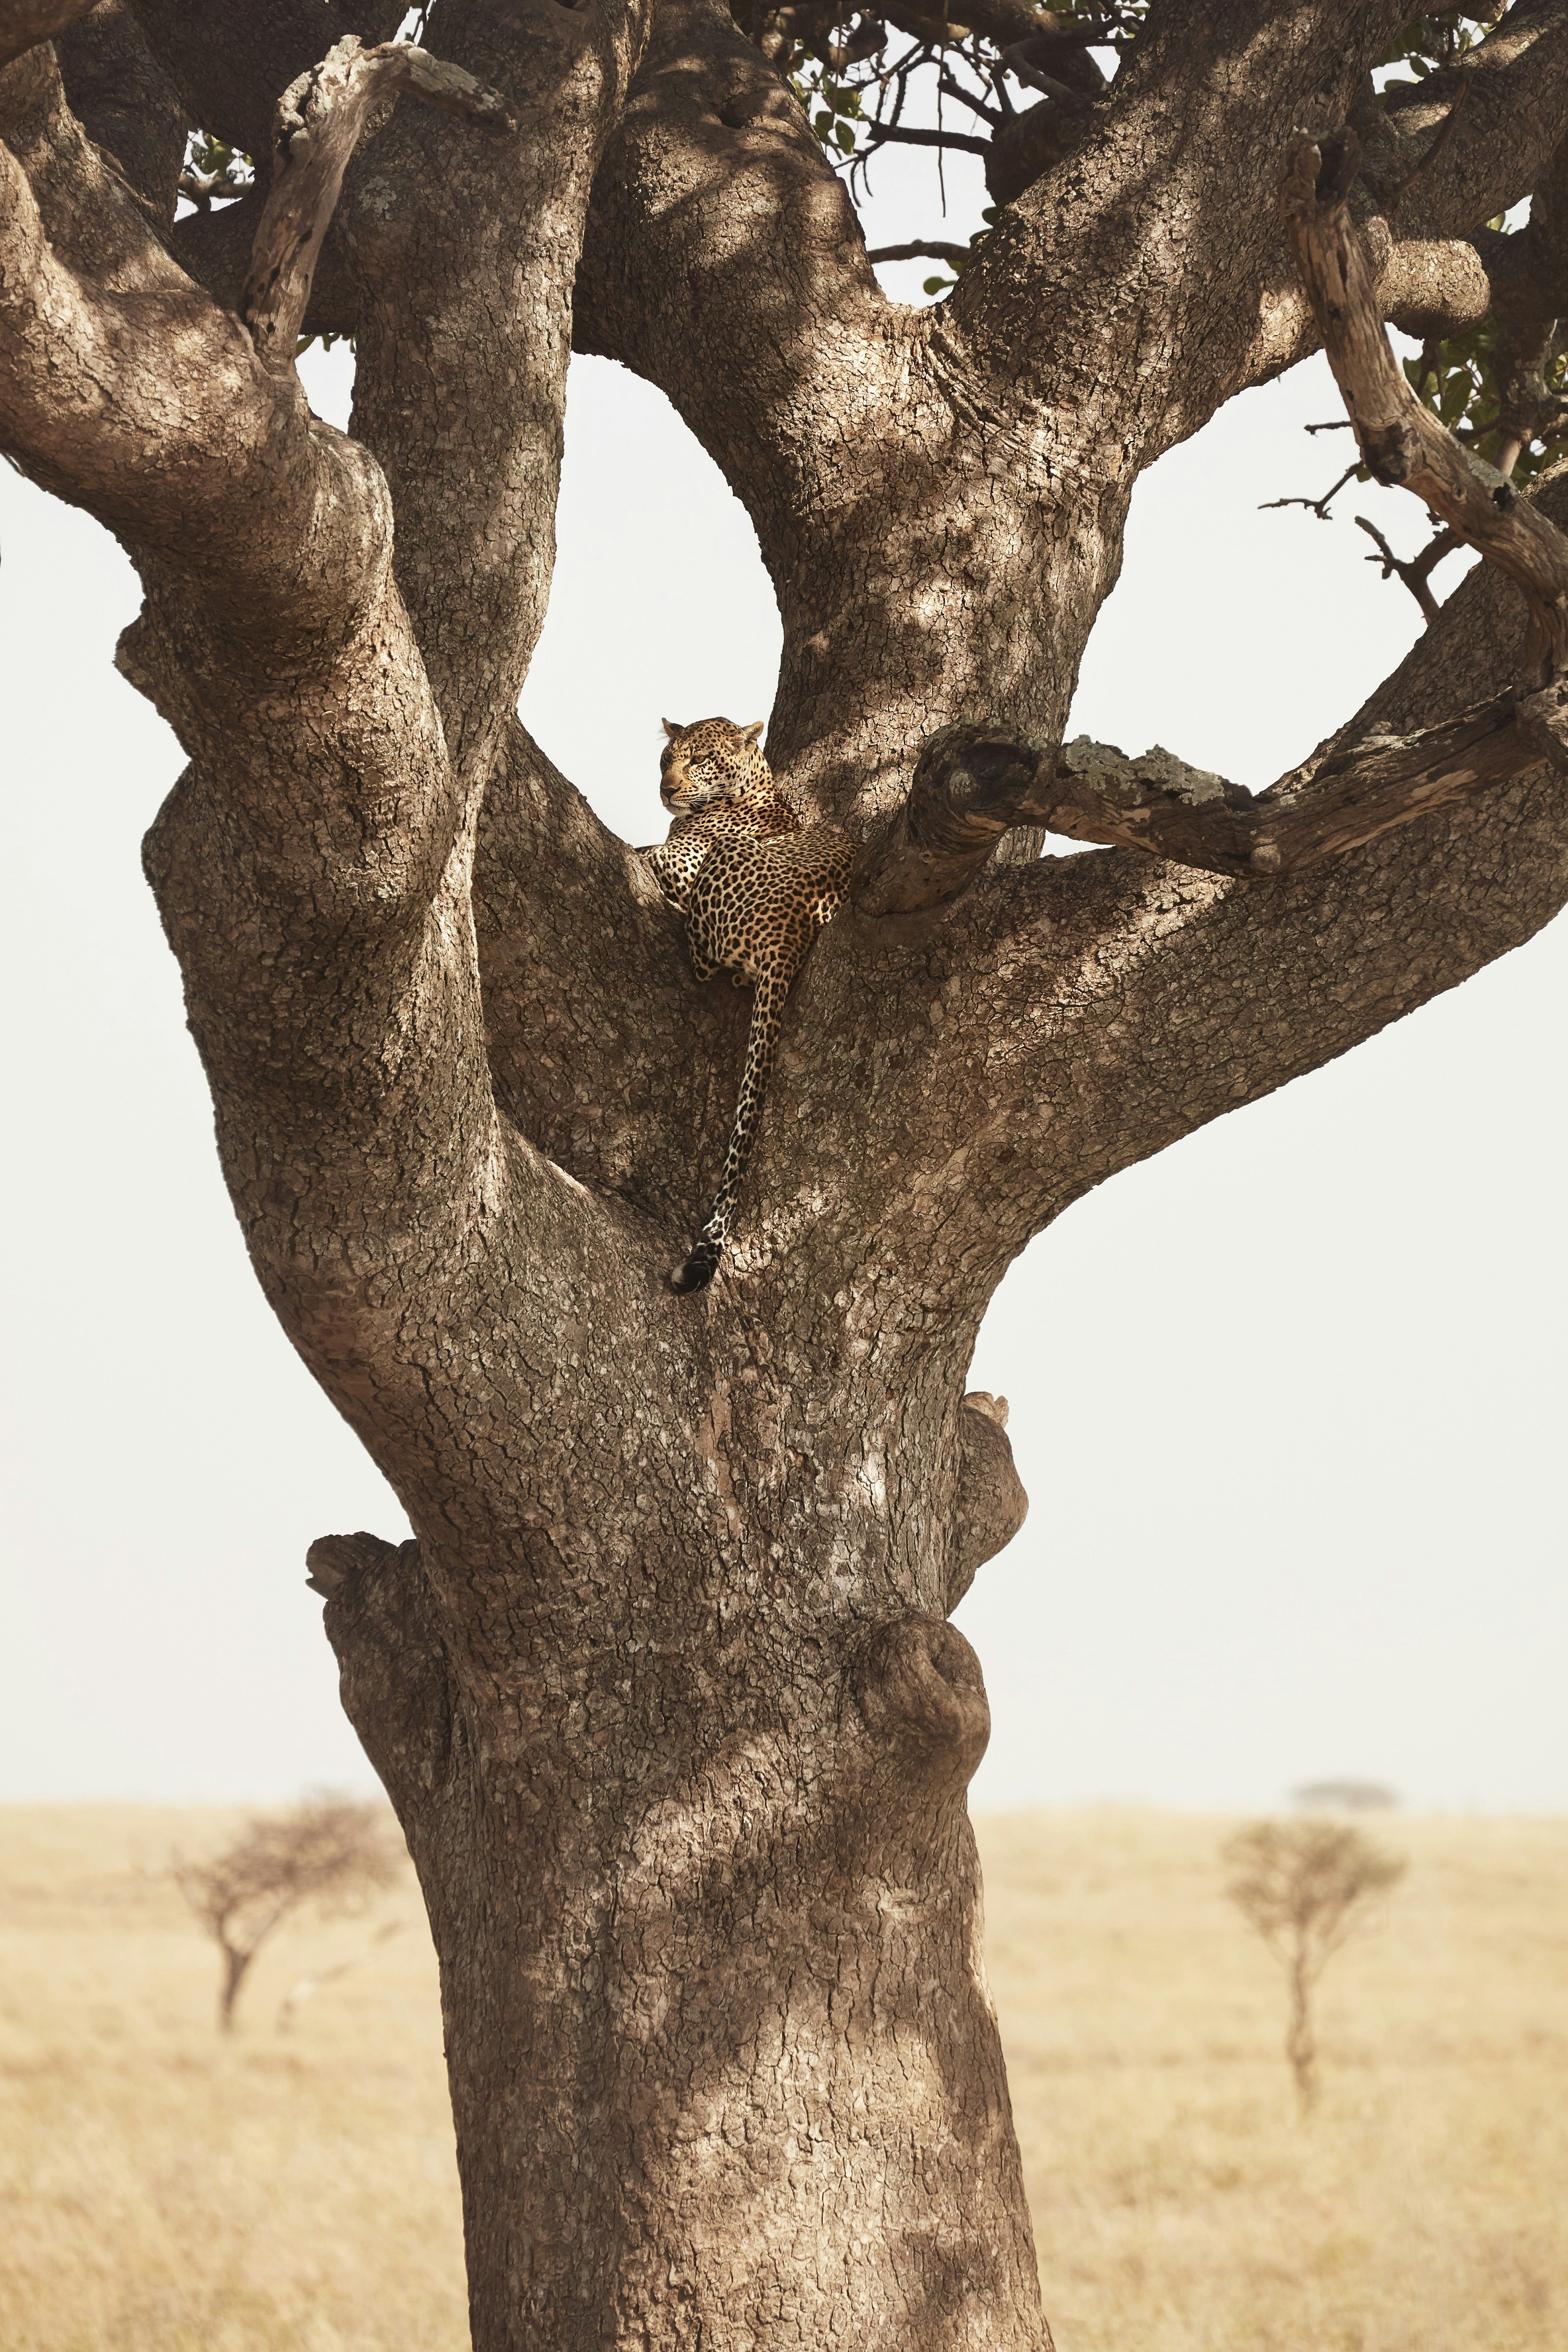 A huge tree trunk dominates the image, rising from the ground and then forking off four directions; at the junction of huge branches rests a lion, with its tail hanging down toward the camera's view.